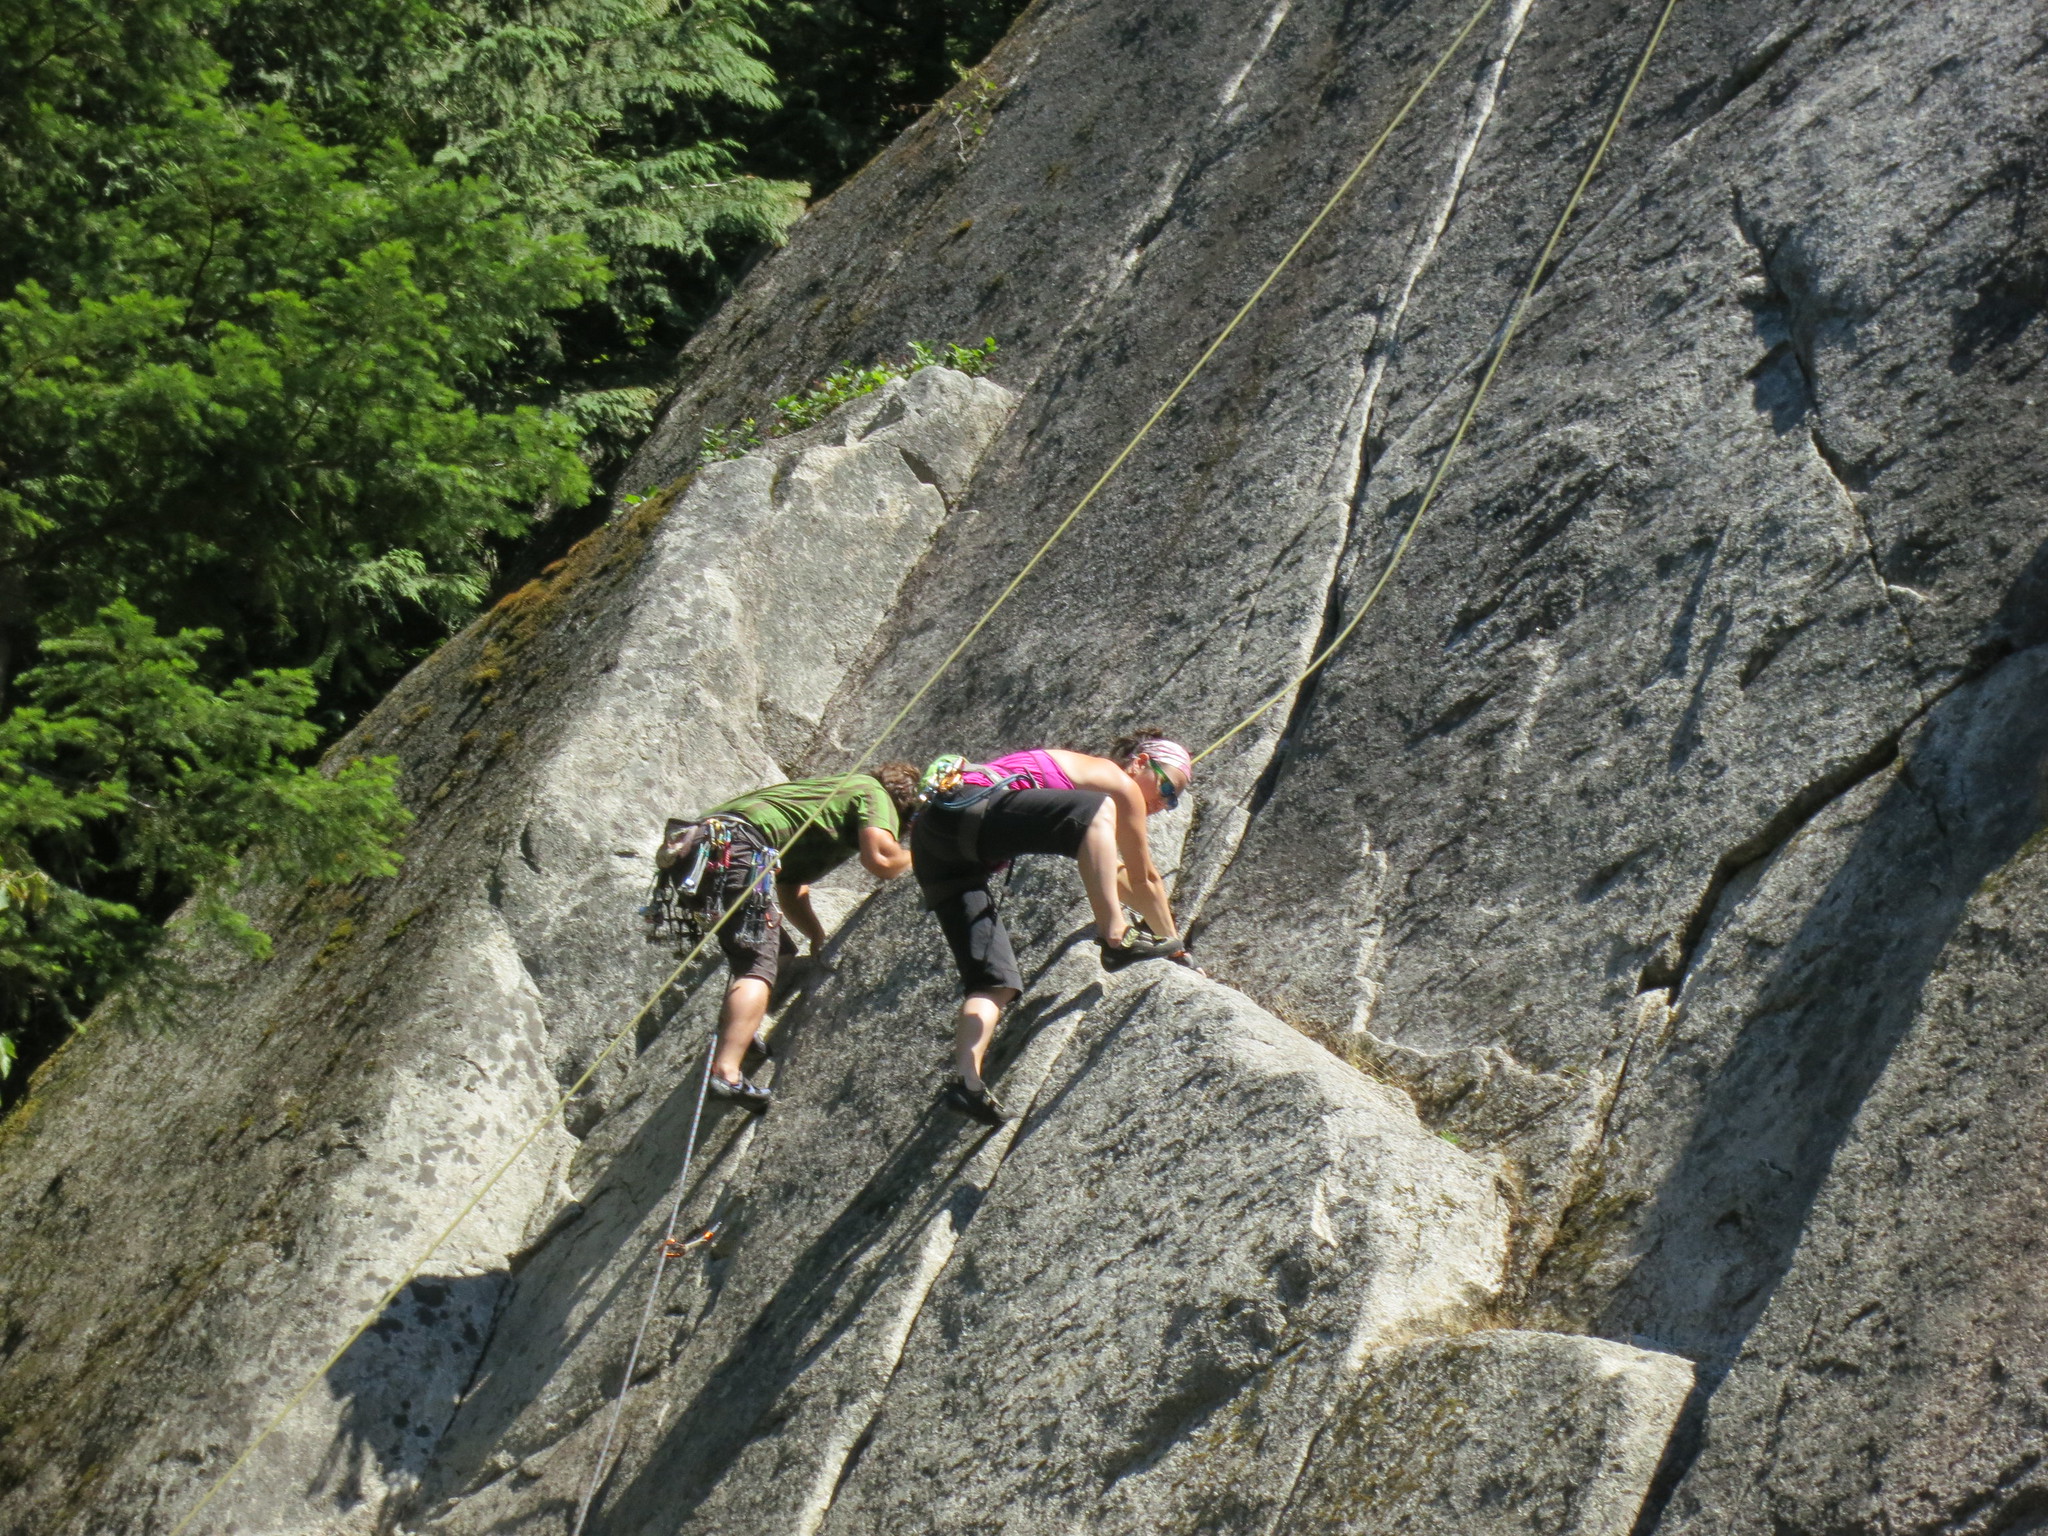 Two people climb a rock face.